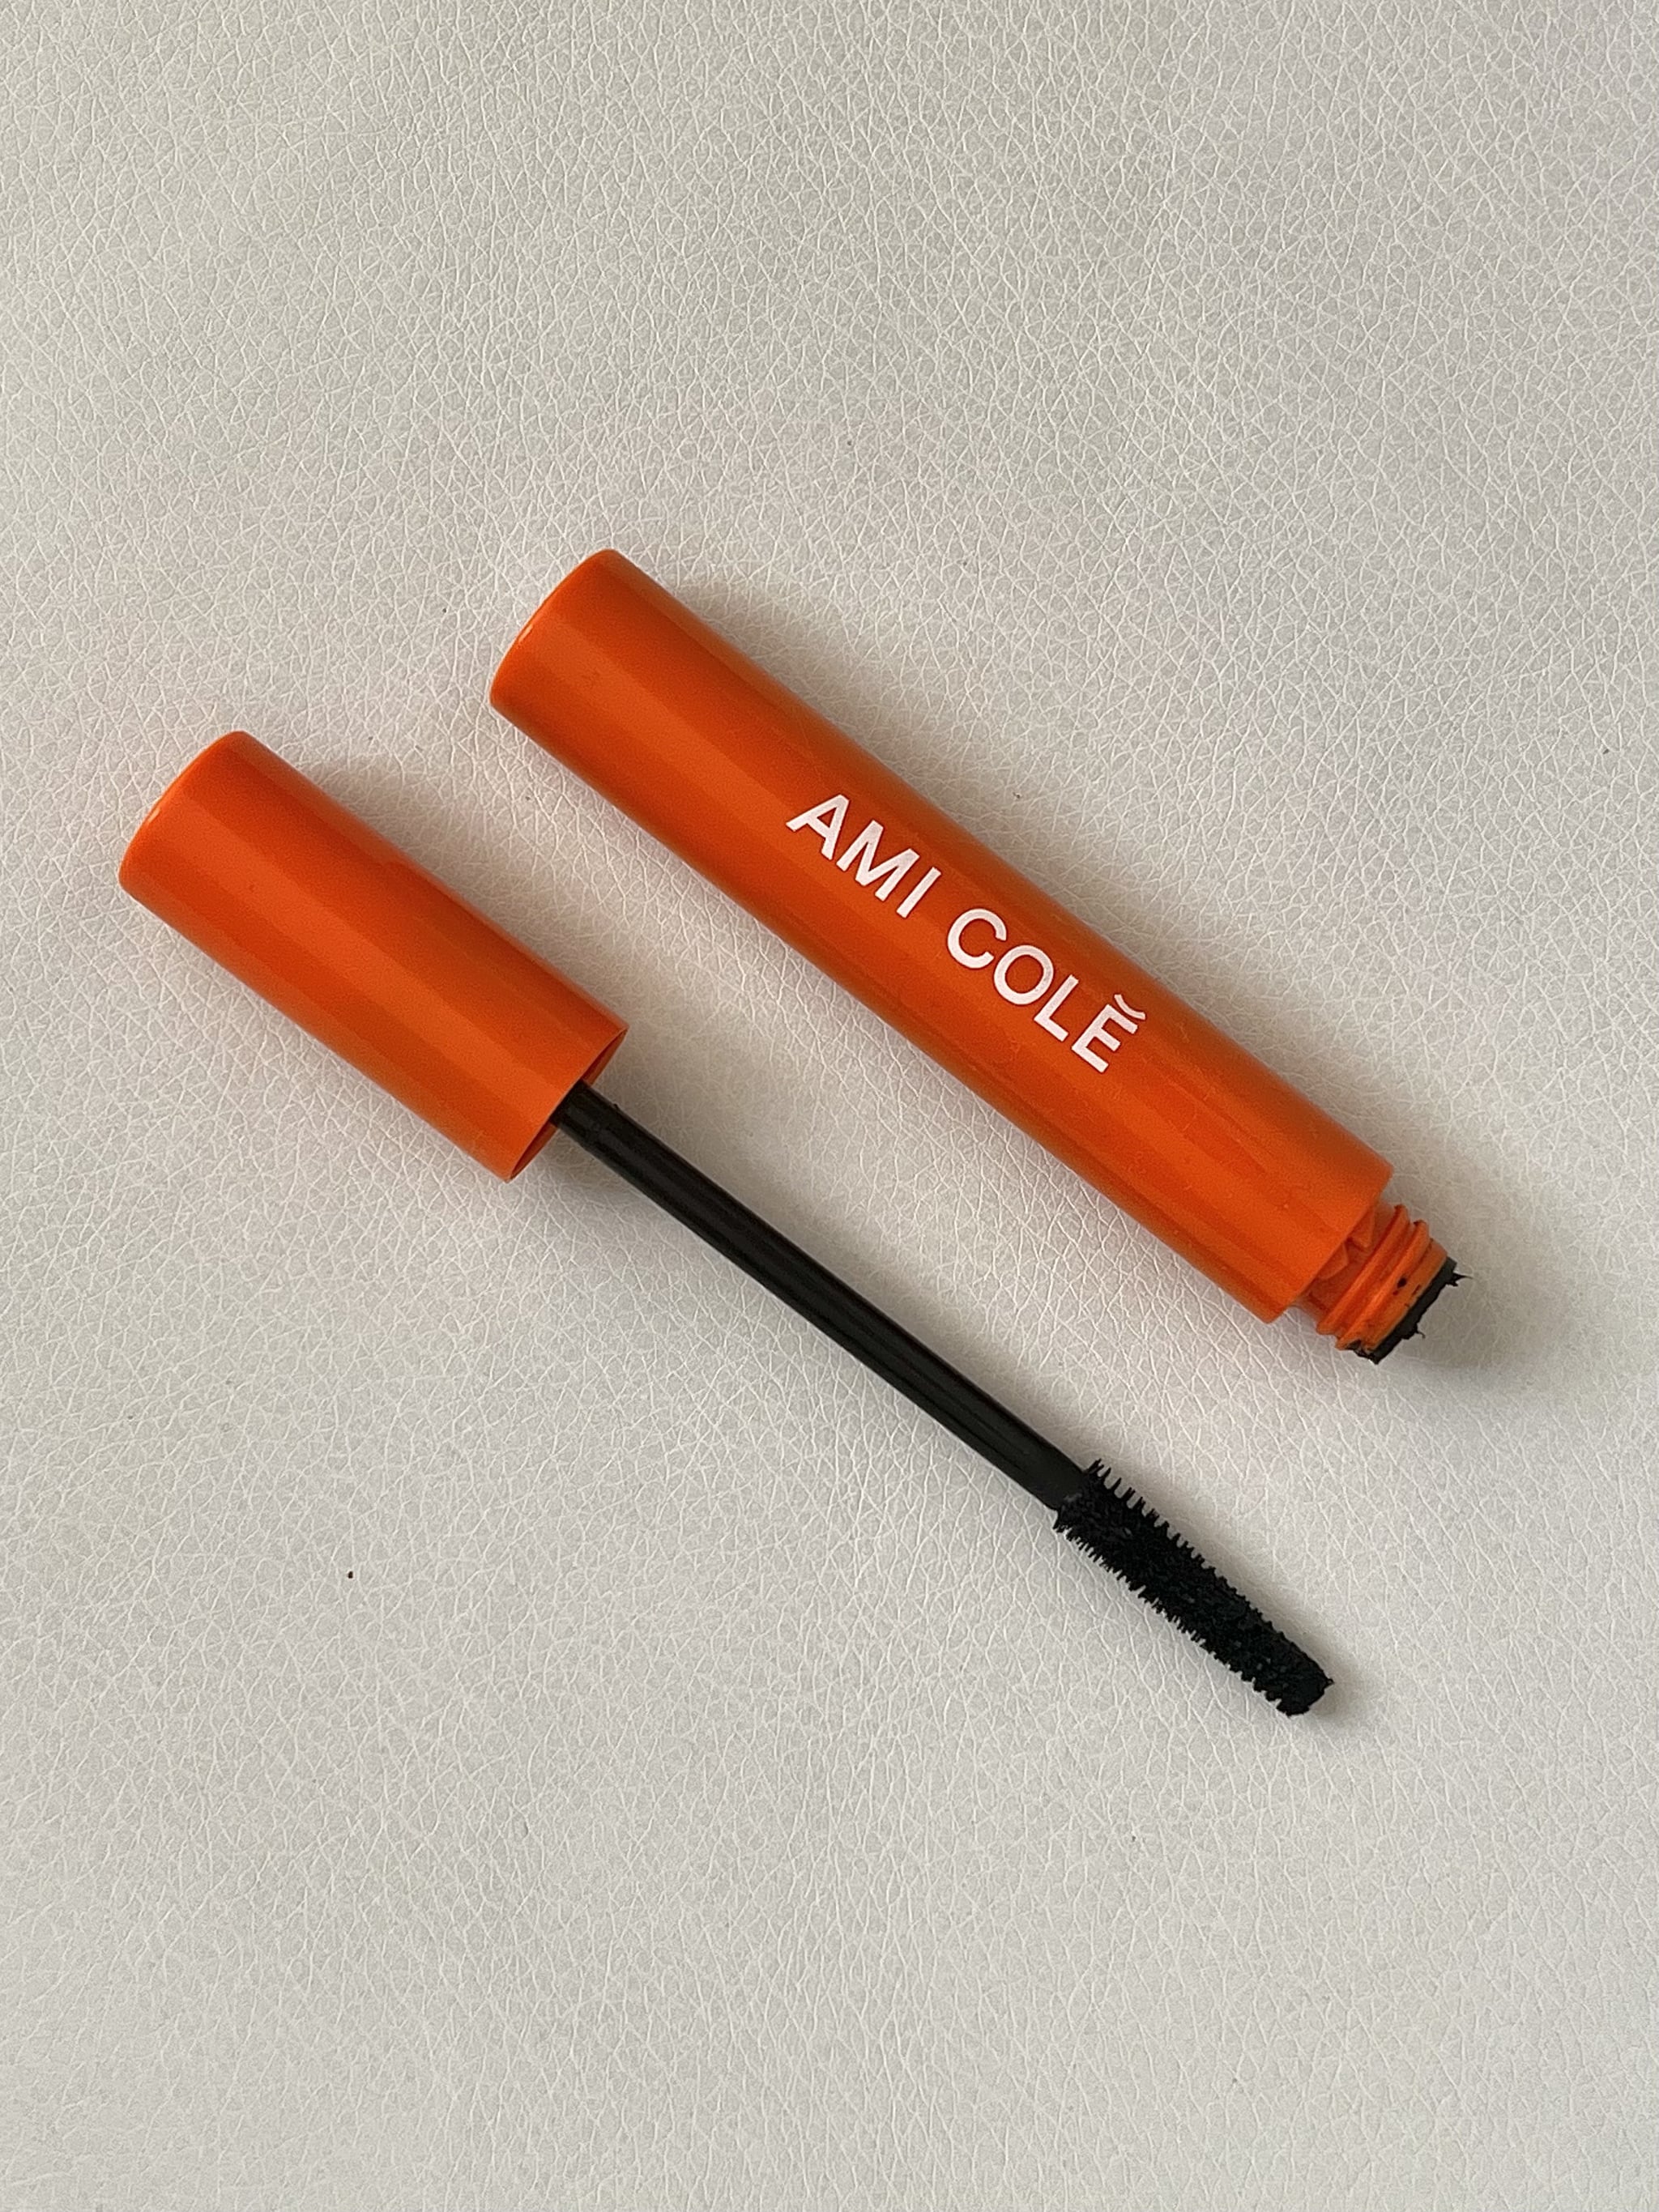 The Ami Cole Lash Amplifying Mascara with cap open and mascara wand showing. The wand is thin and tapered with densely packed bristles.